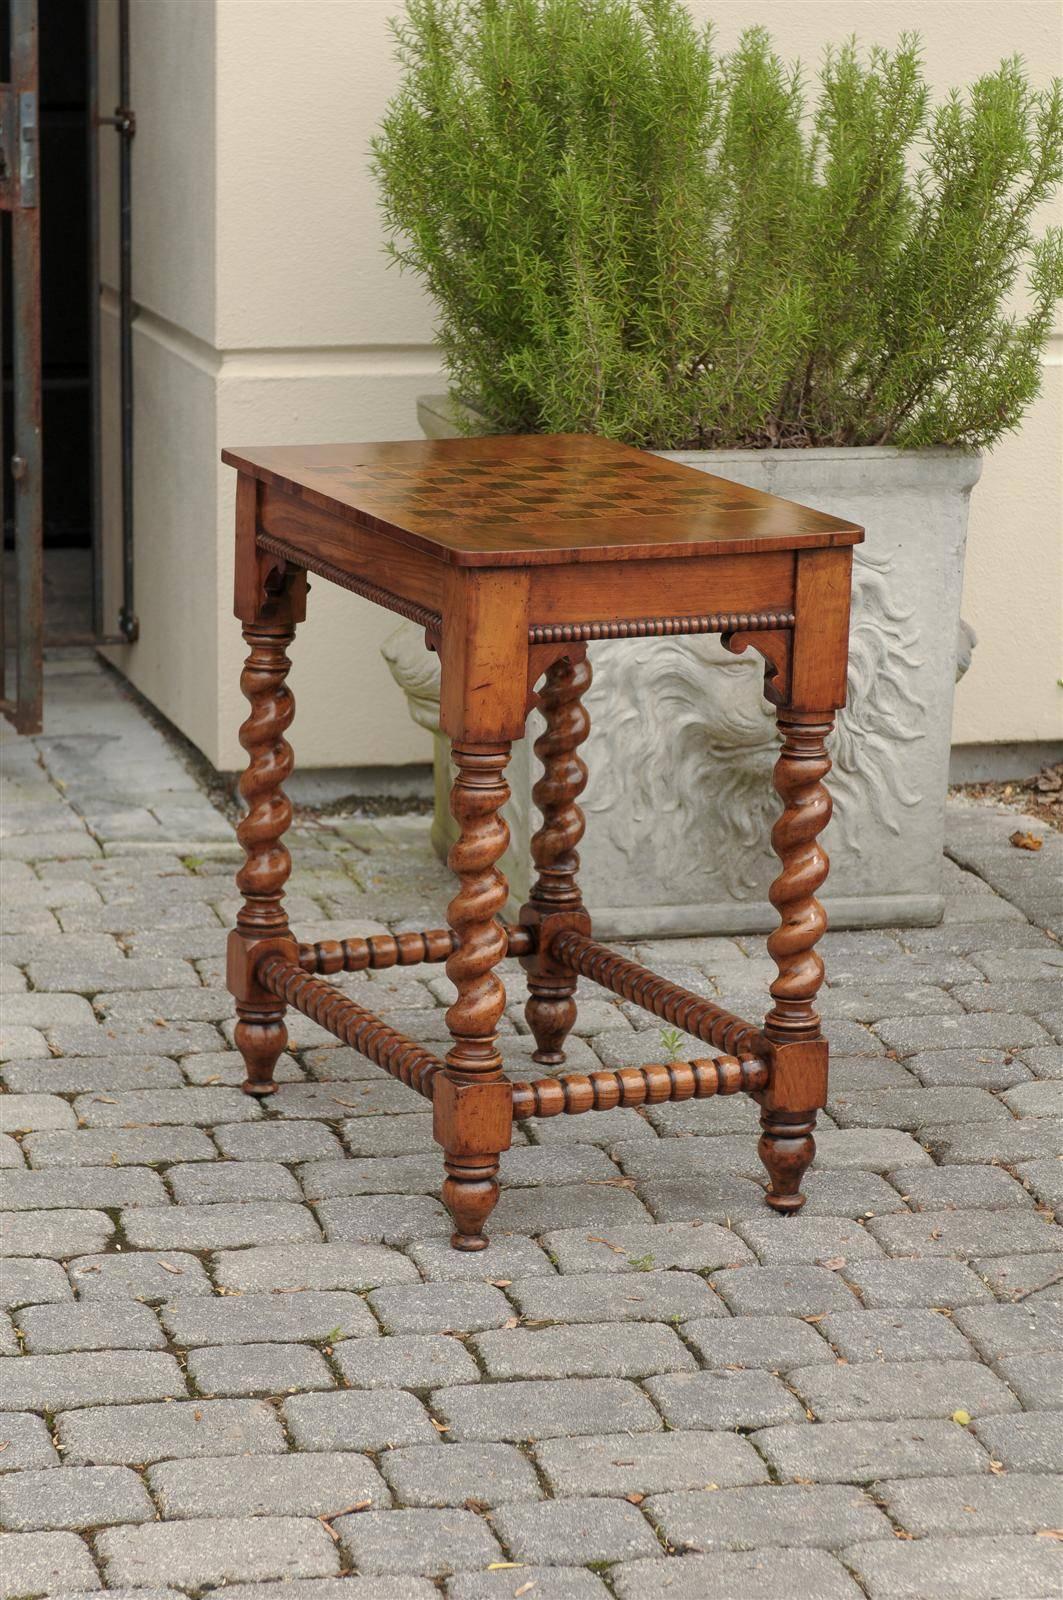 A 19th century English barley twist leg side table with checker board inlay top. This English small size side table from circa 1880 features a checker board inlaid top with a single lateral drawer. The table is adorned with wooden beading on all